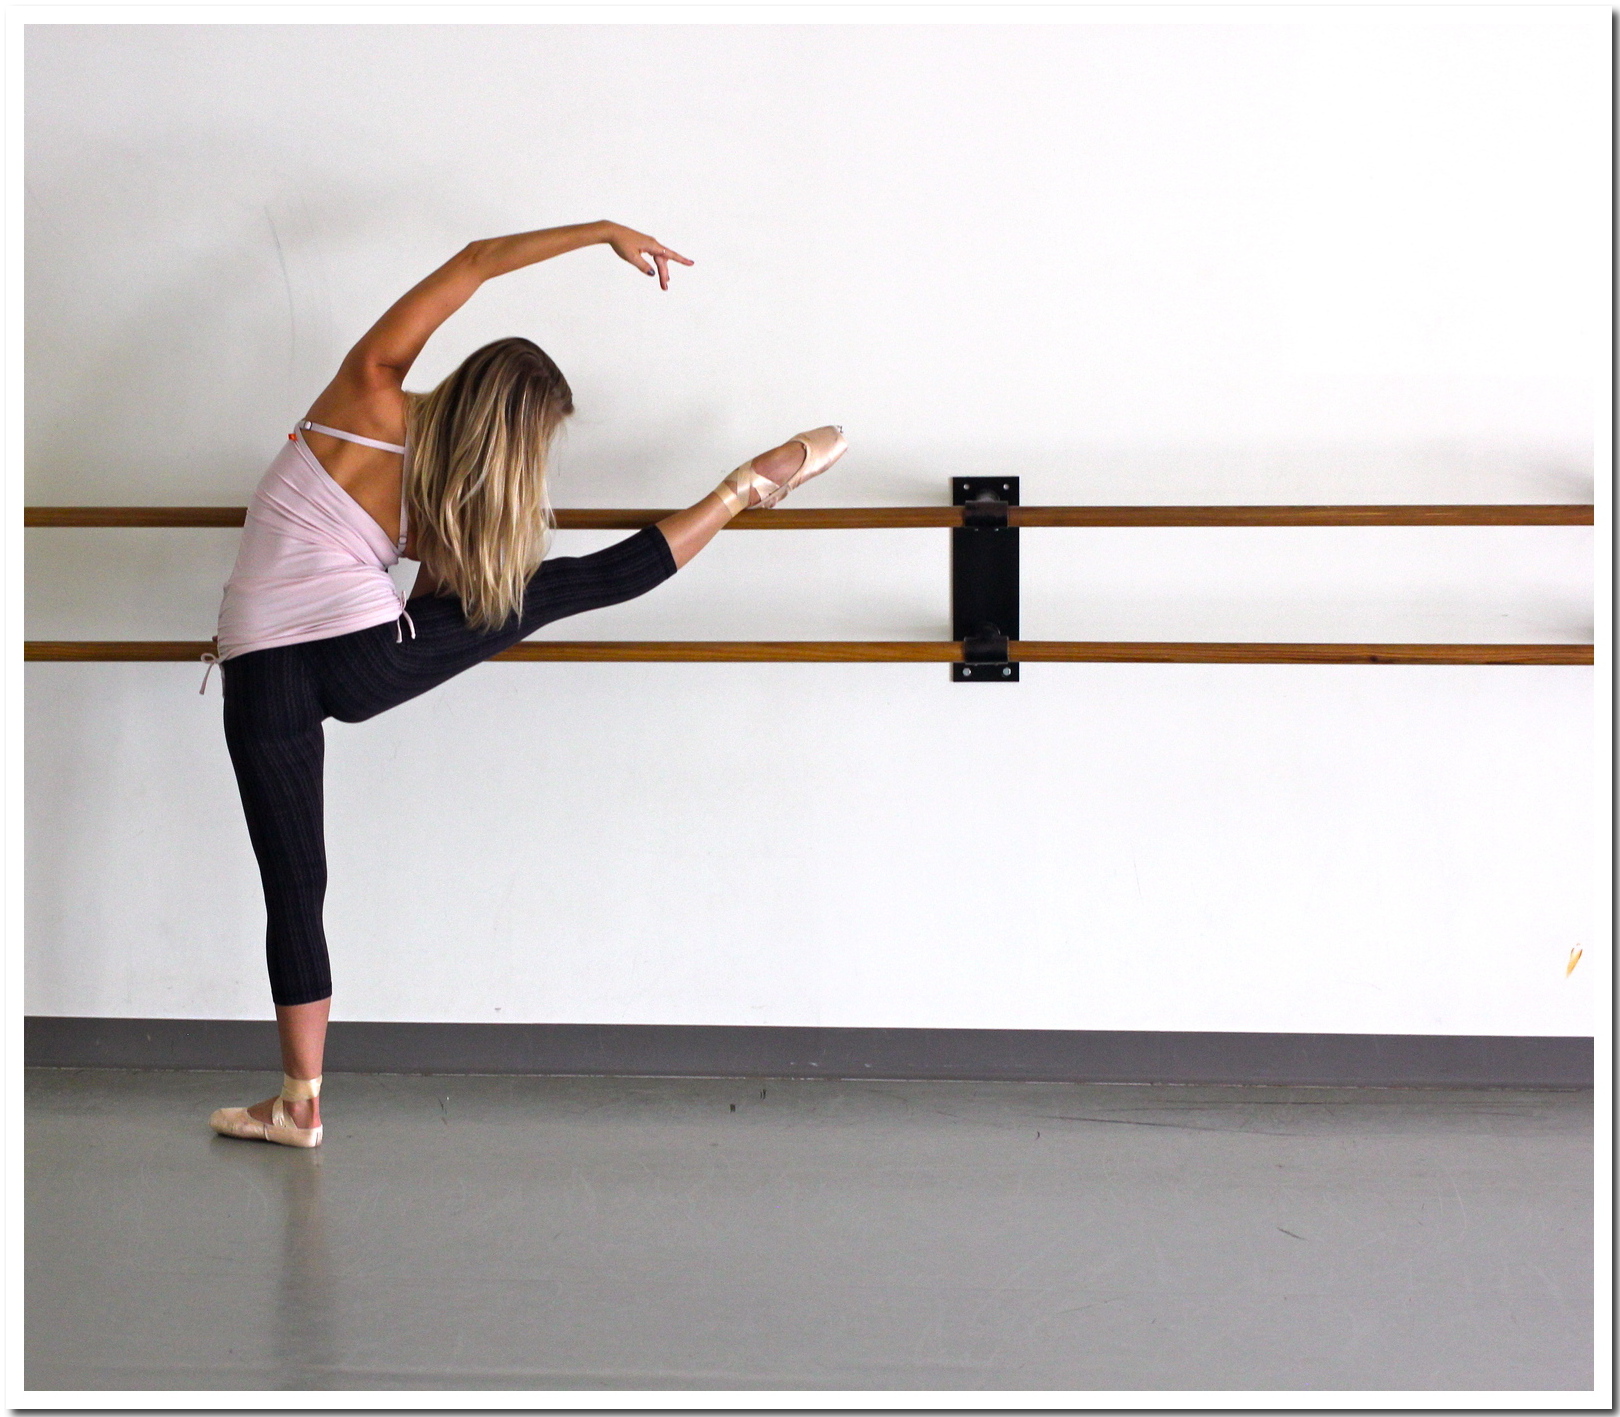 Back at the barre